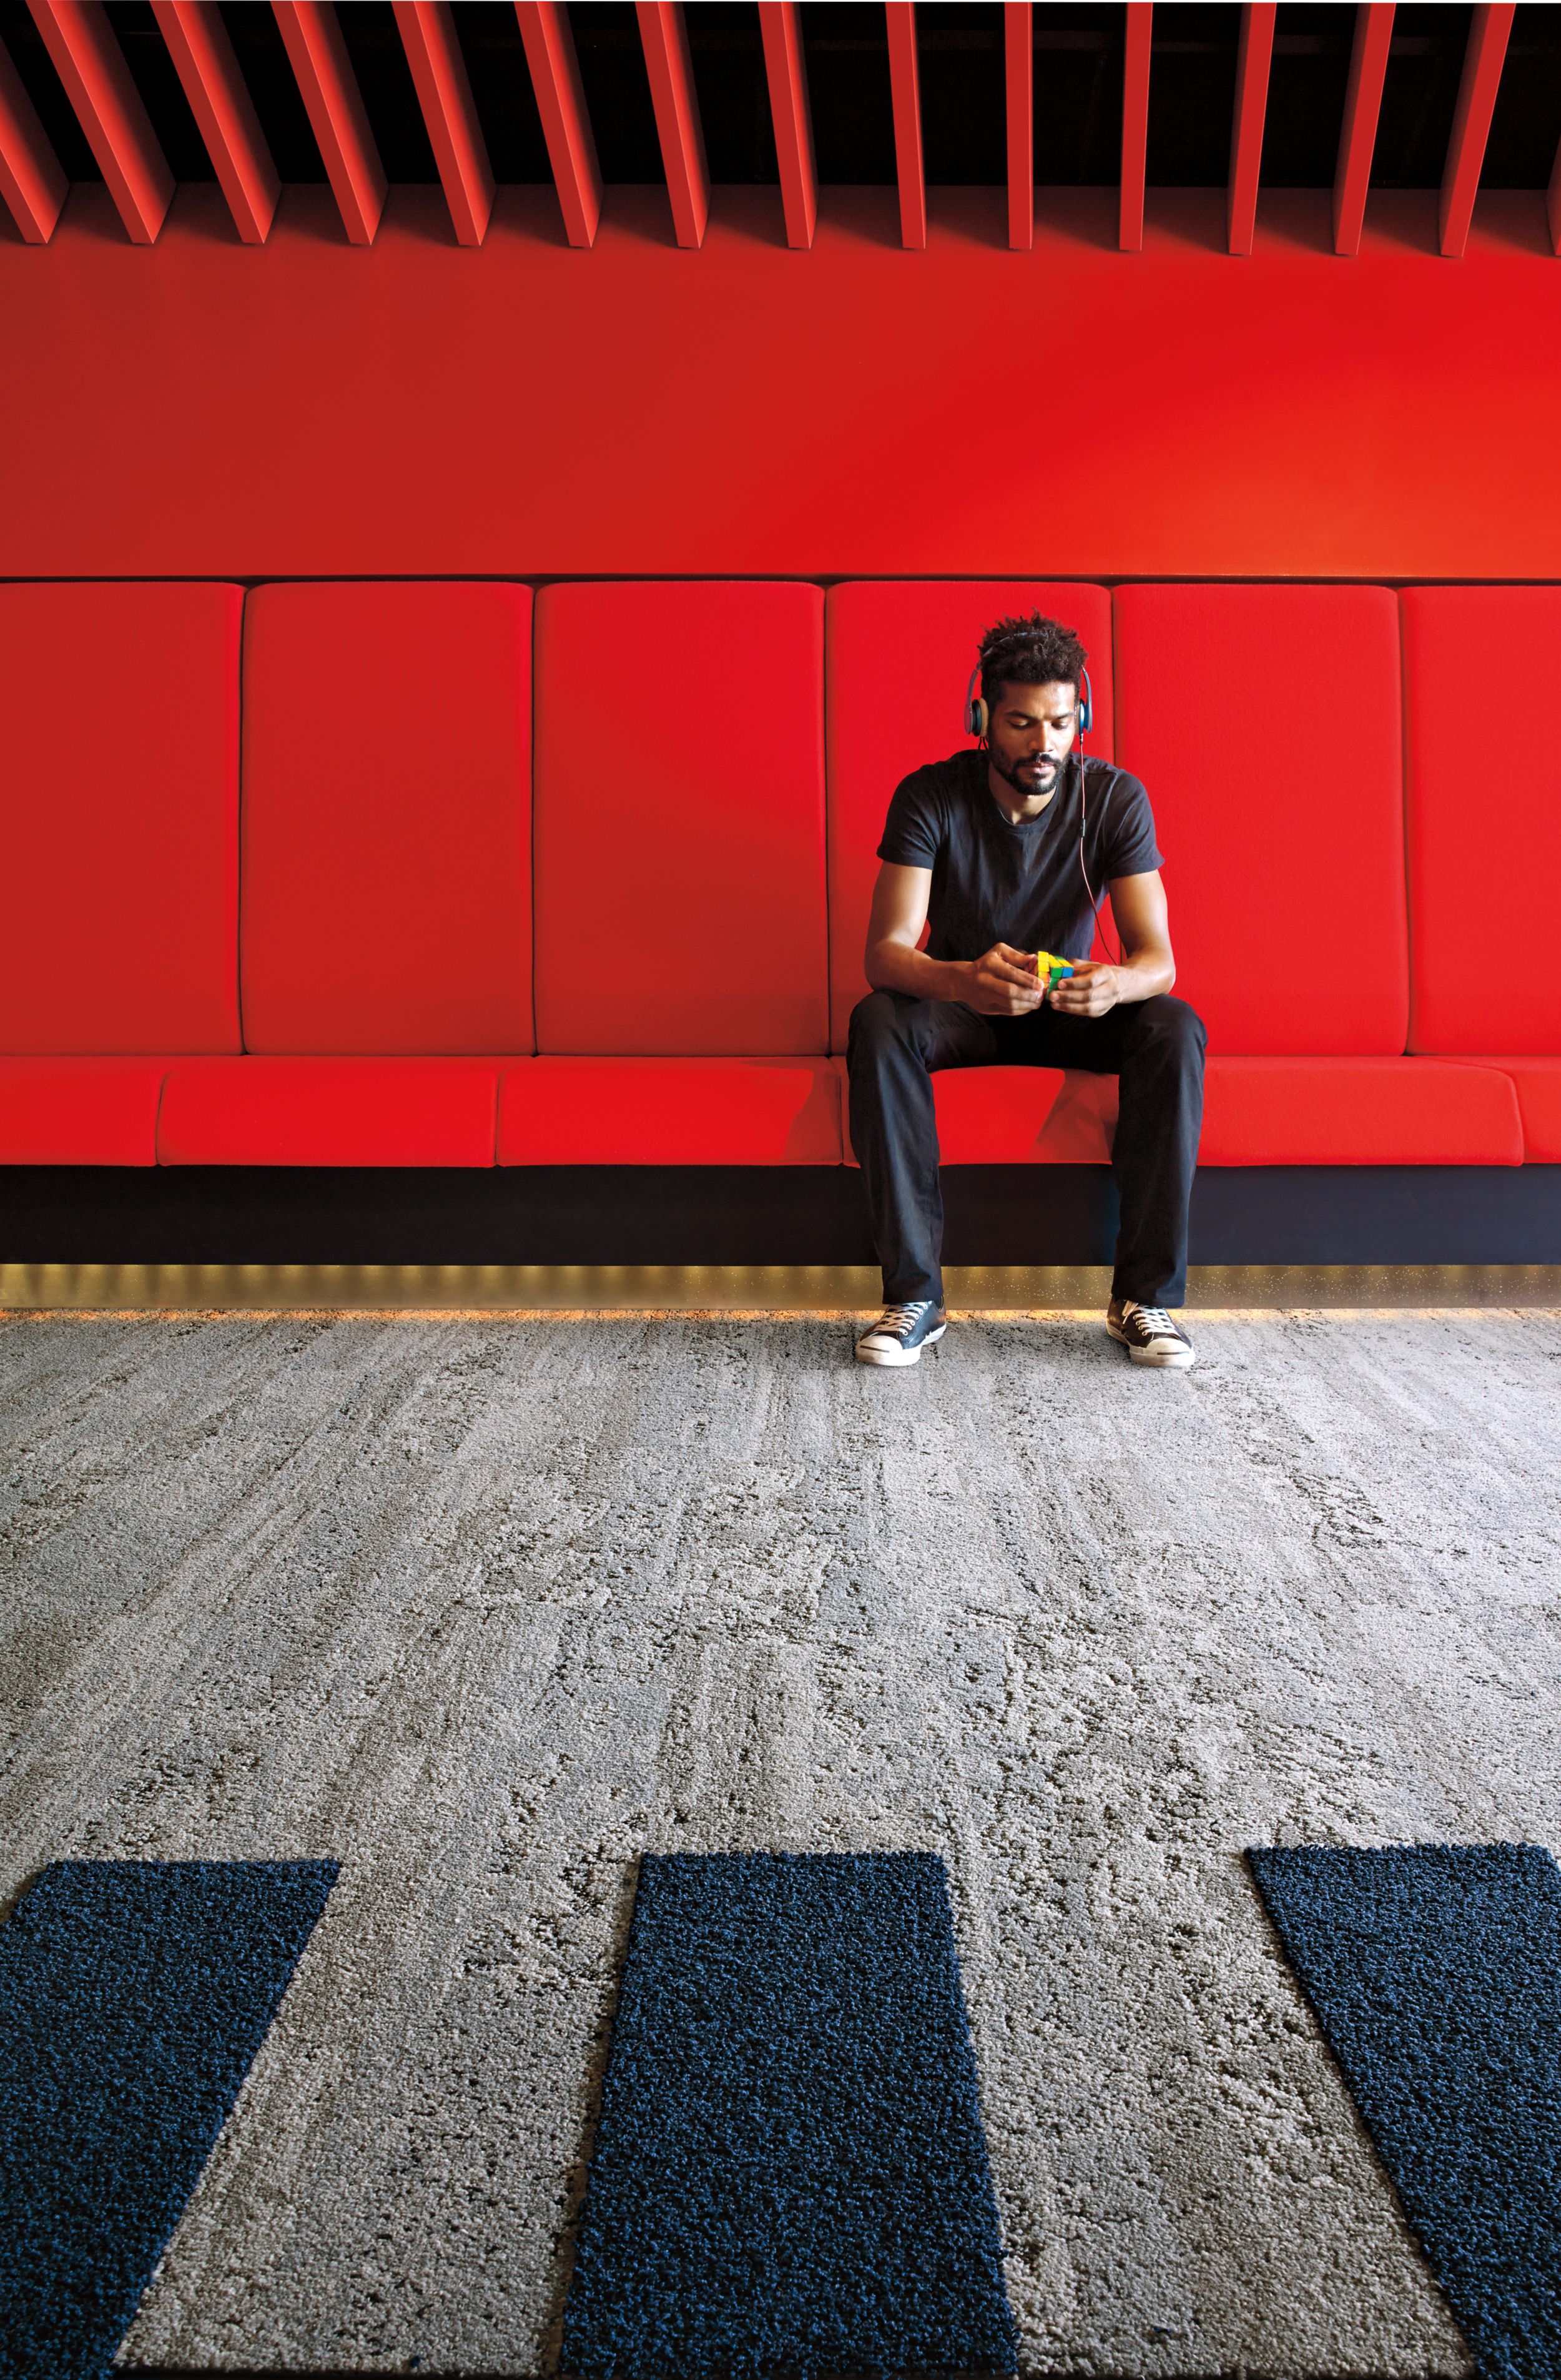 image Interface HN810 plank carpet tile in waiting area with red bench and wall and man listening to music numéro 7